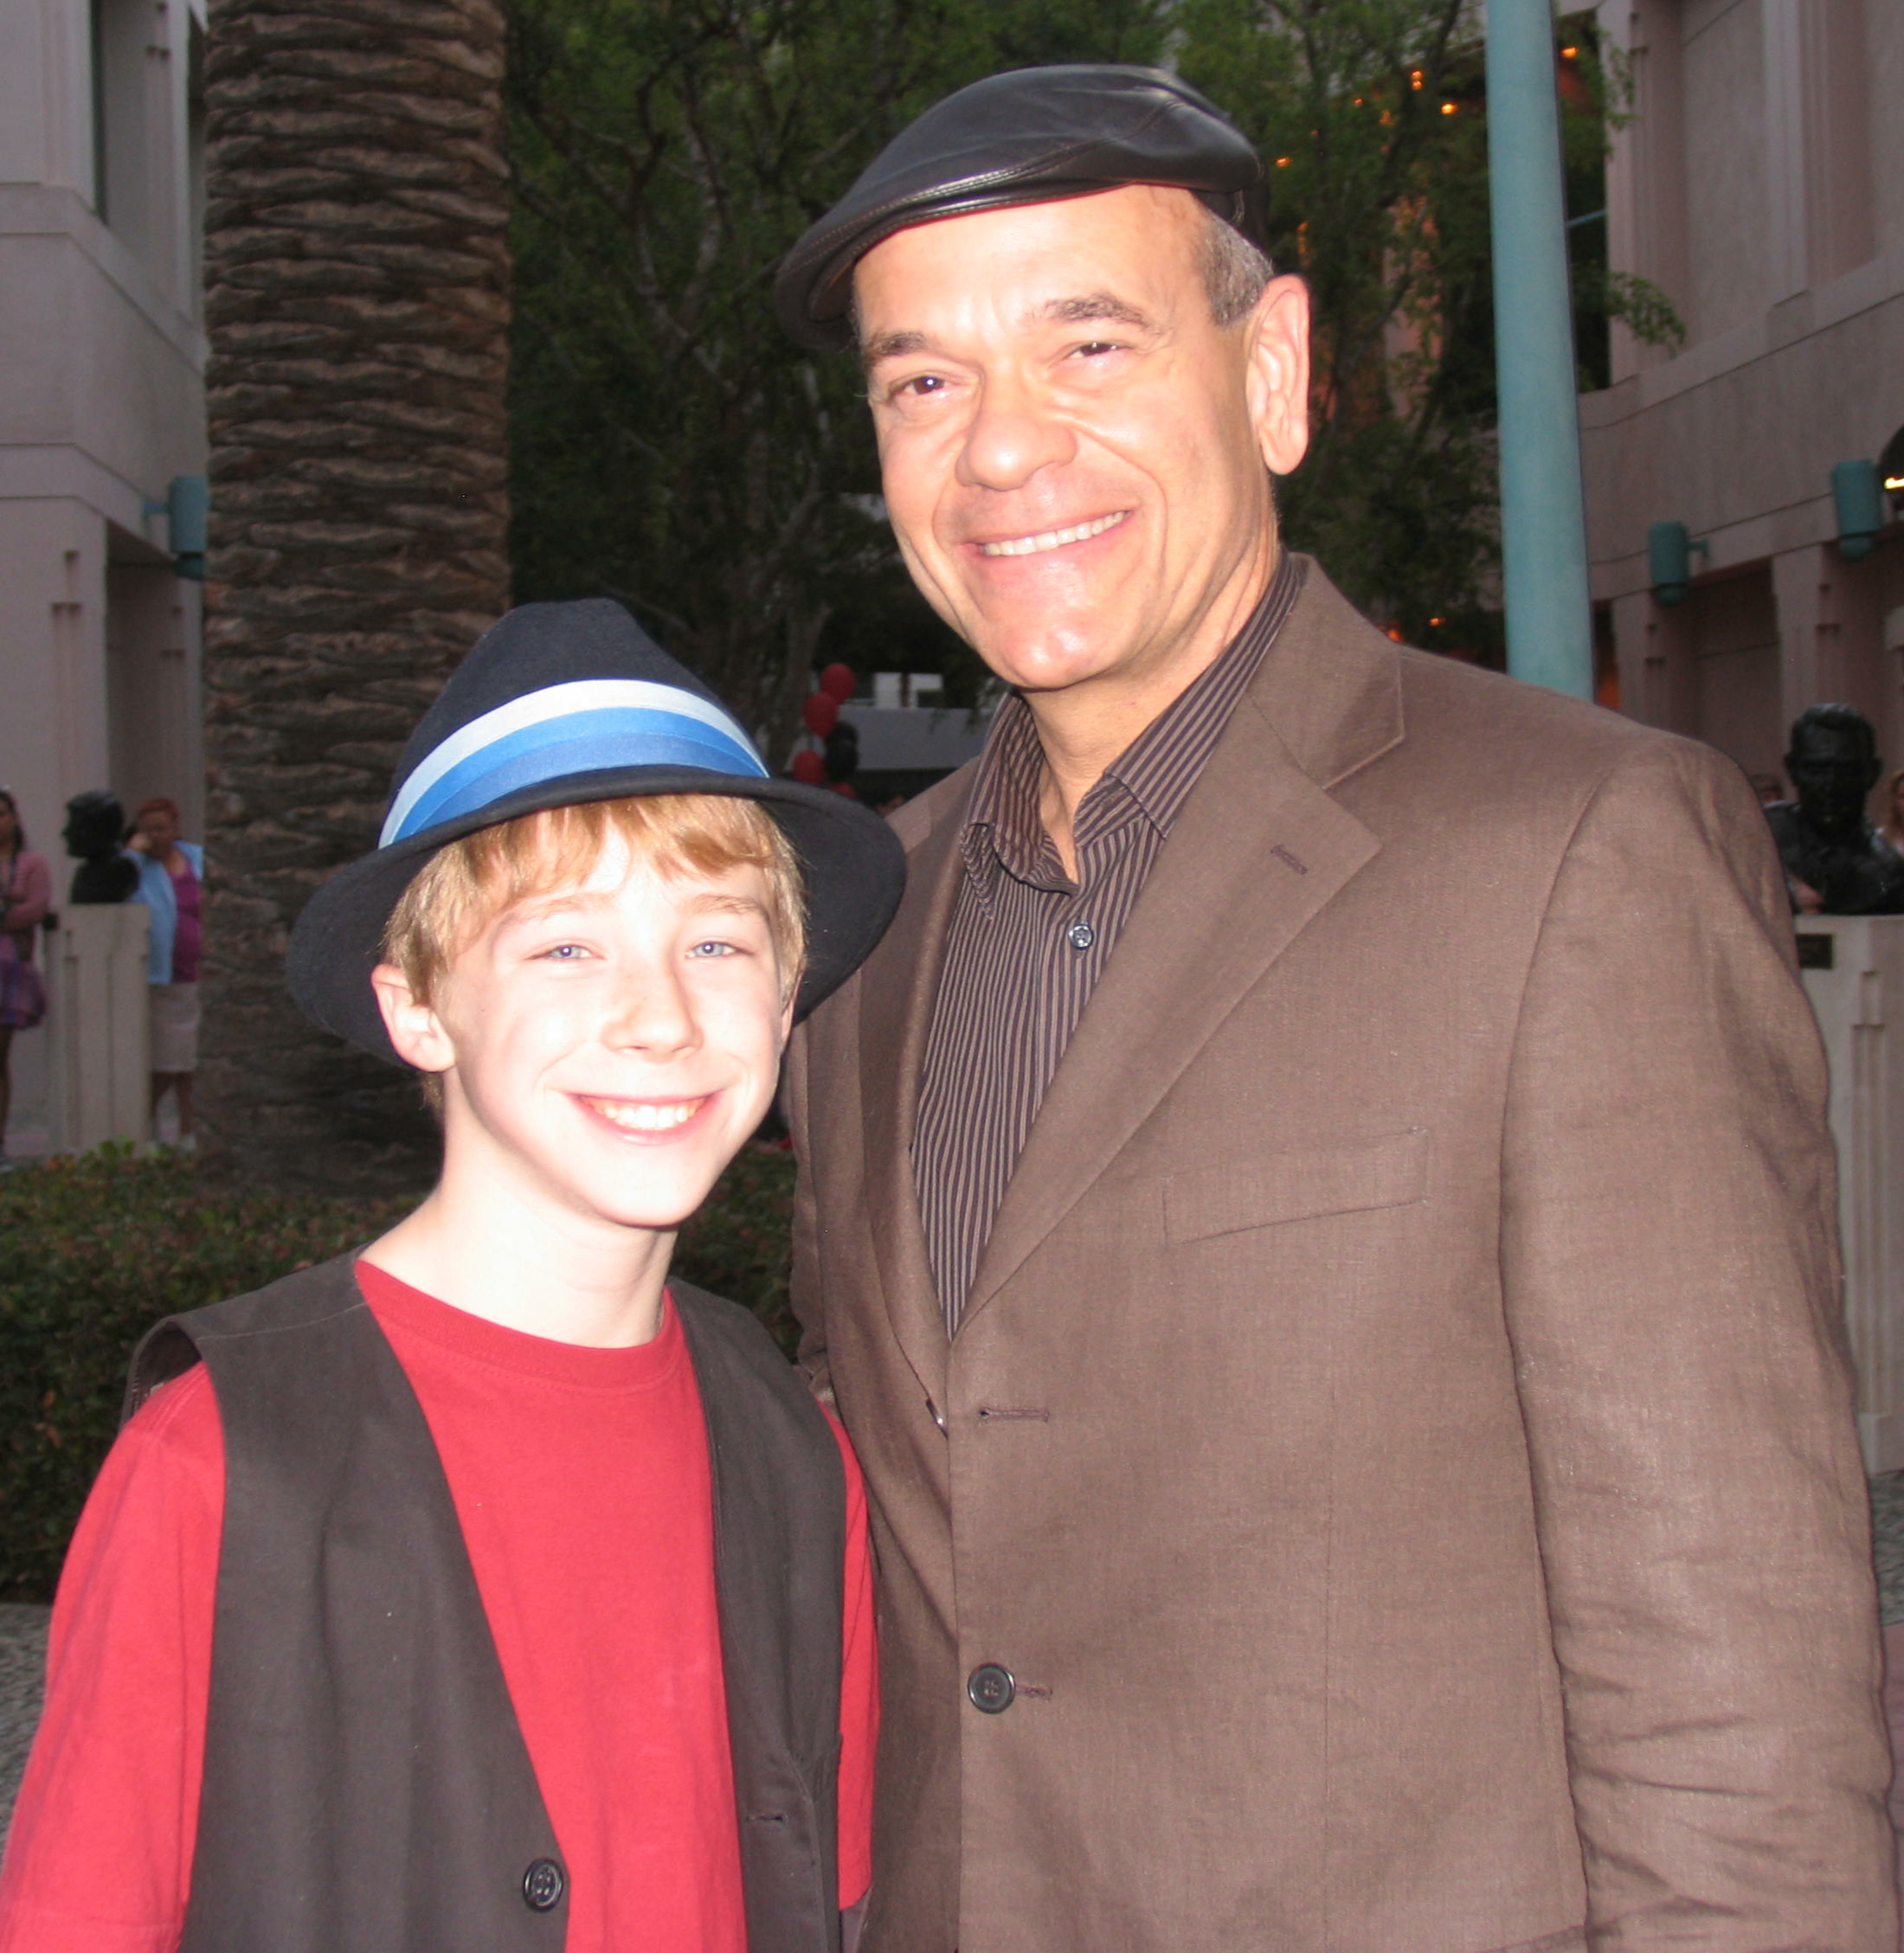 Robert Picardo and Joey Luthman at the Premiere of 